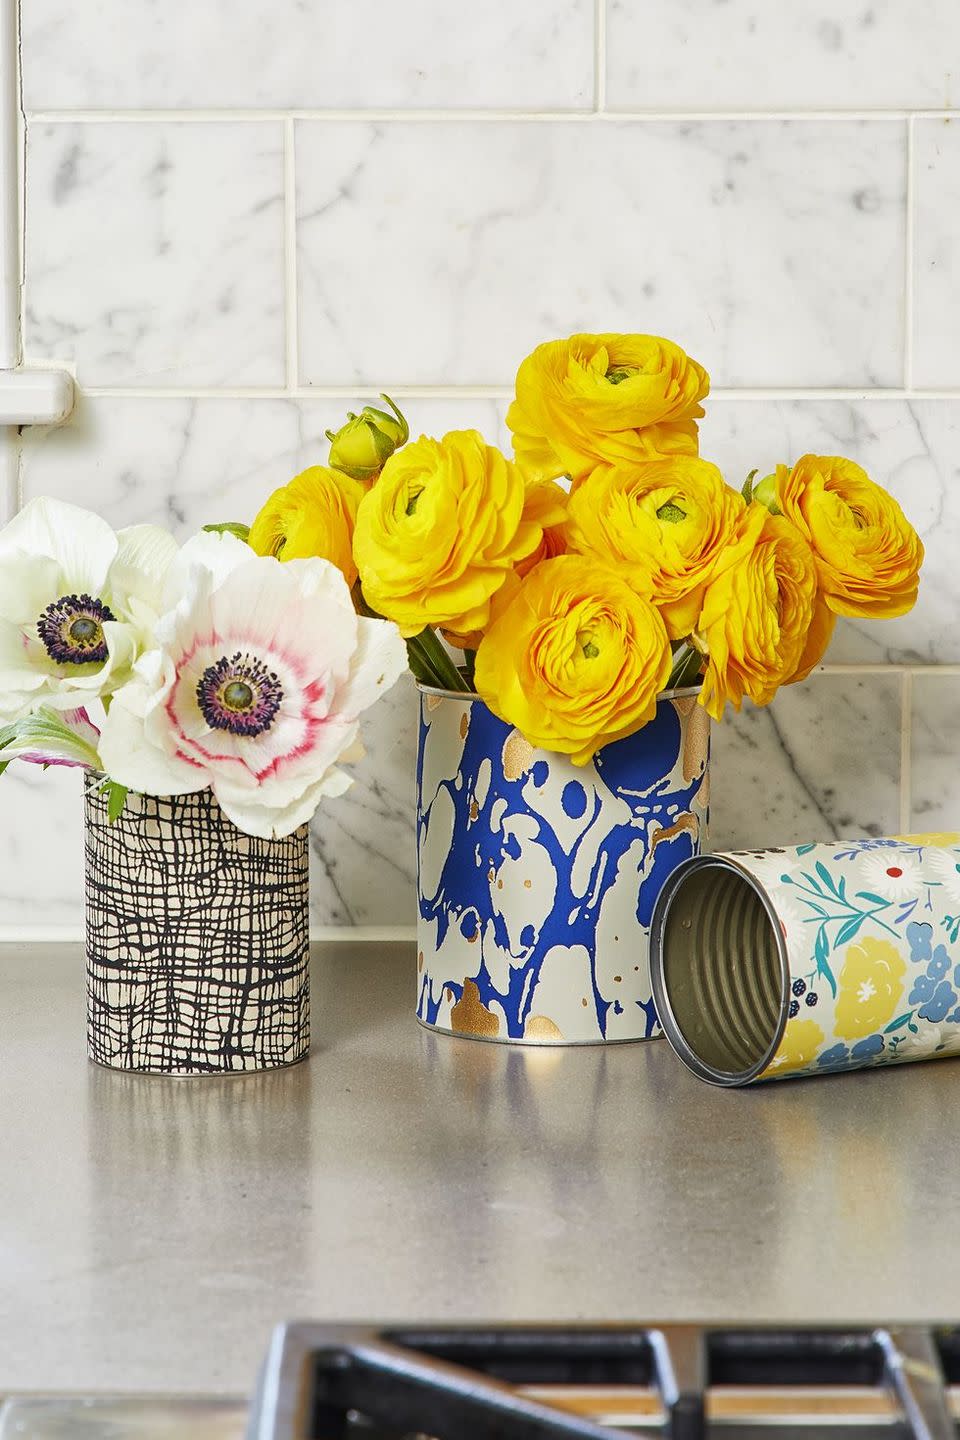 32) Wallpapered Vessels